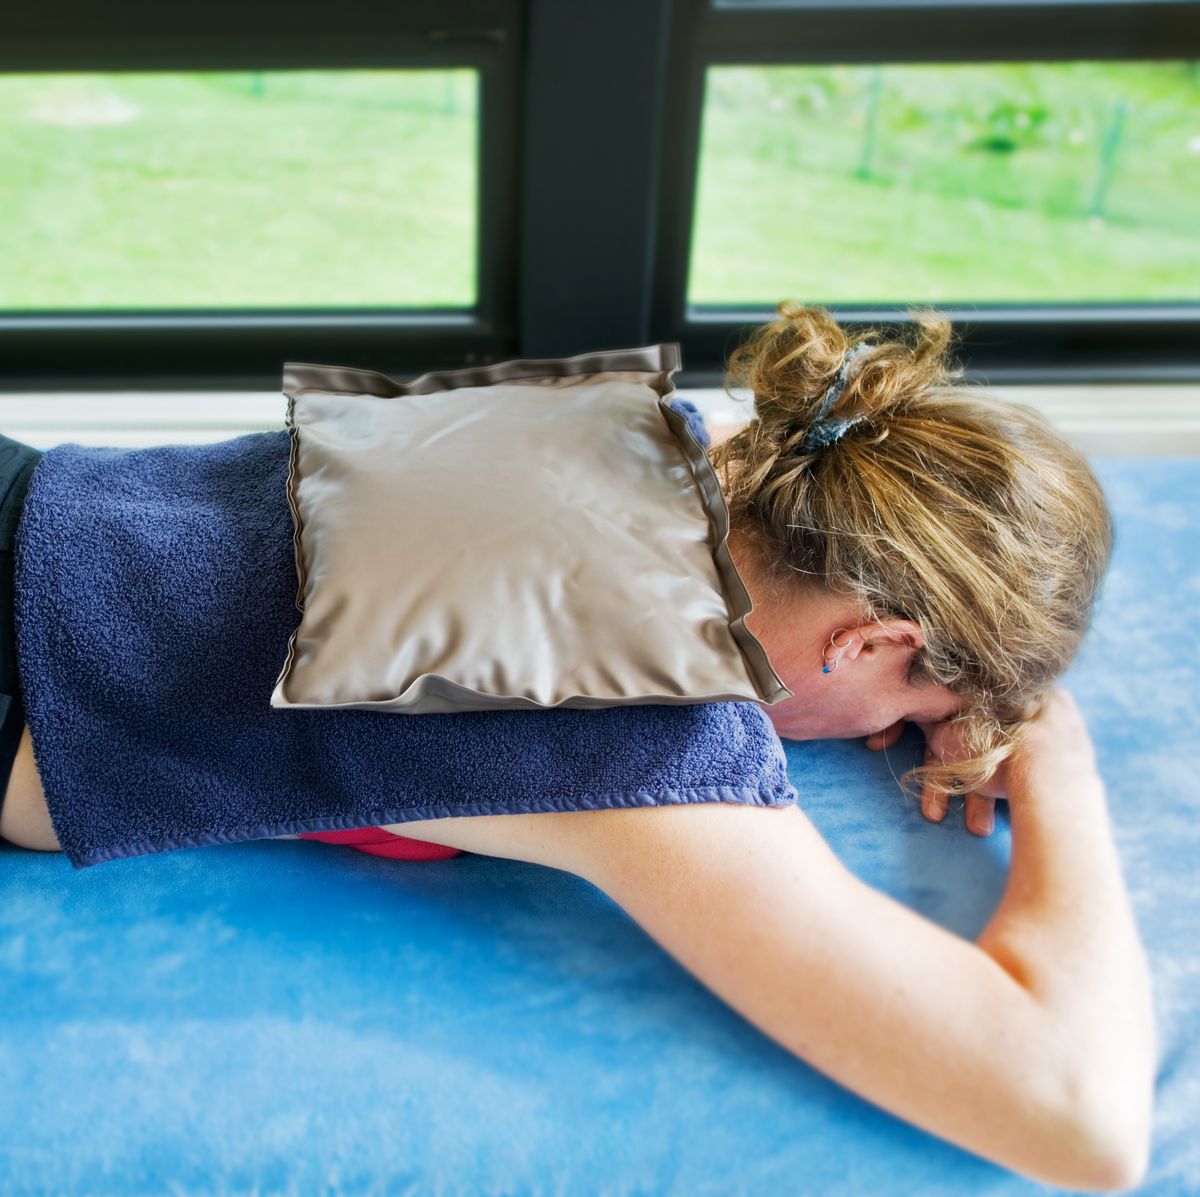 heat therapy benefits runners a heating pad on the upper back